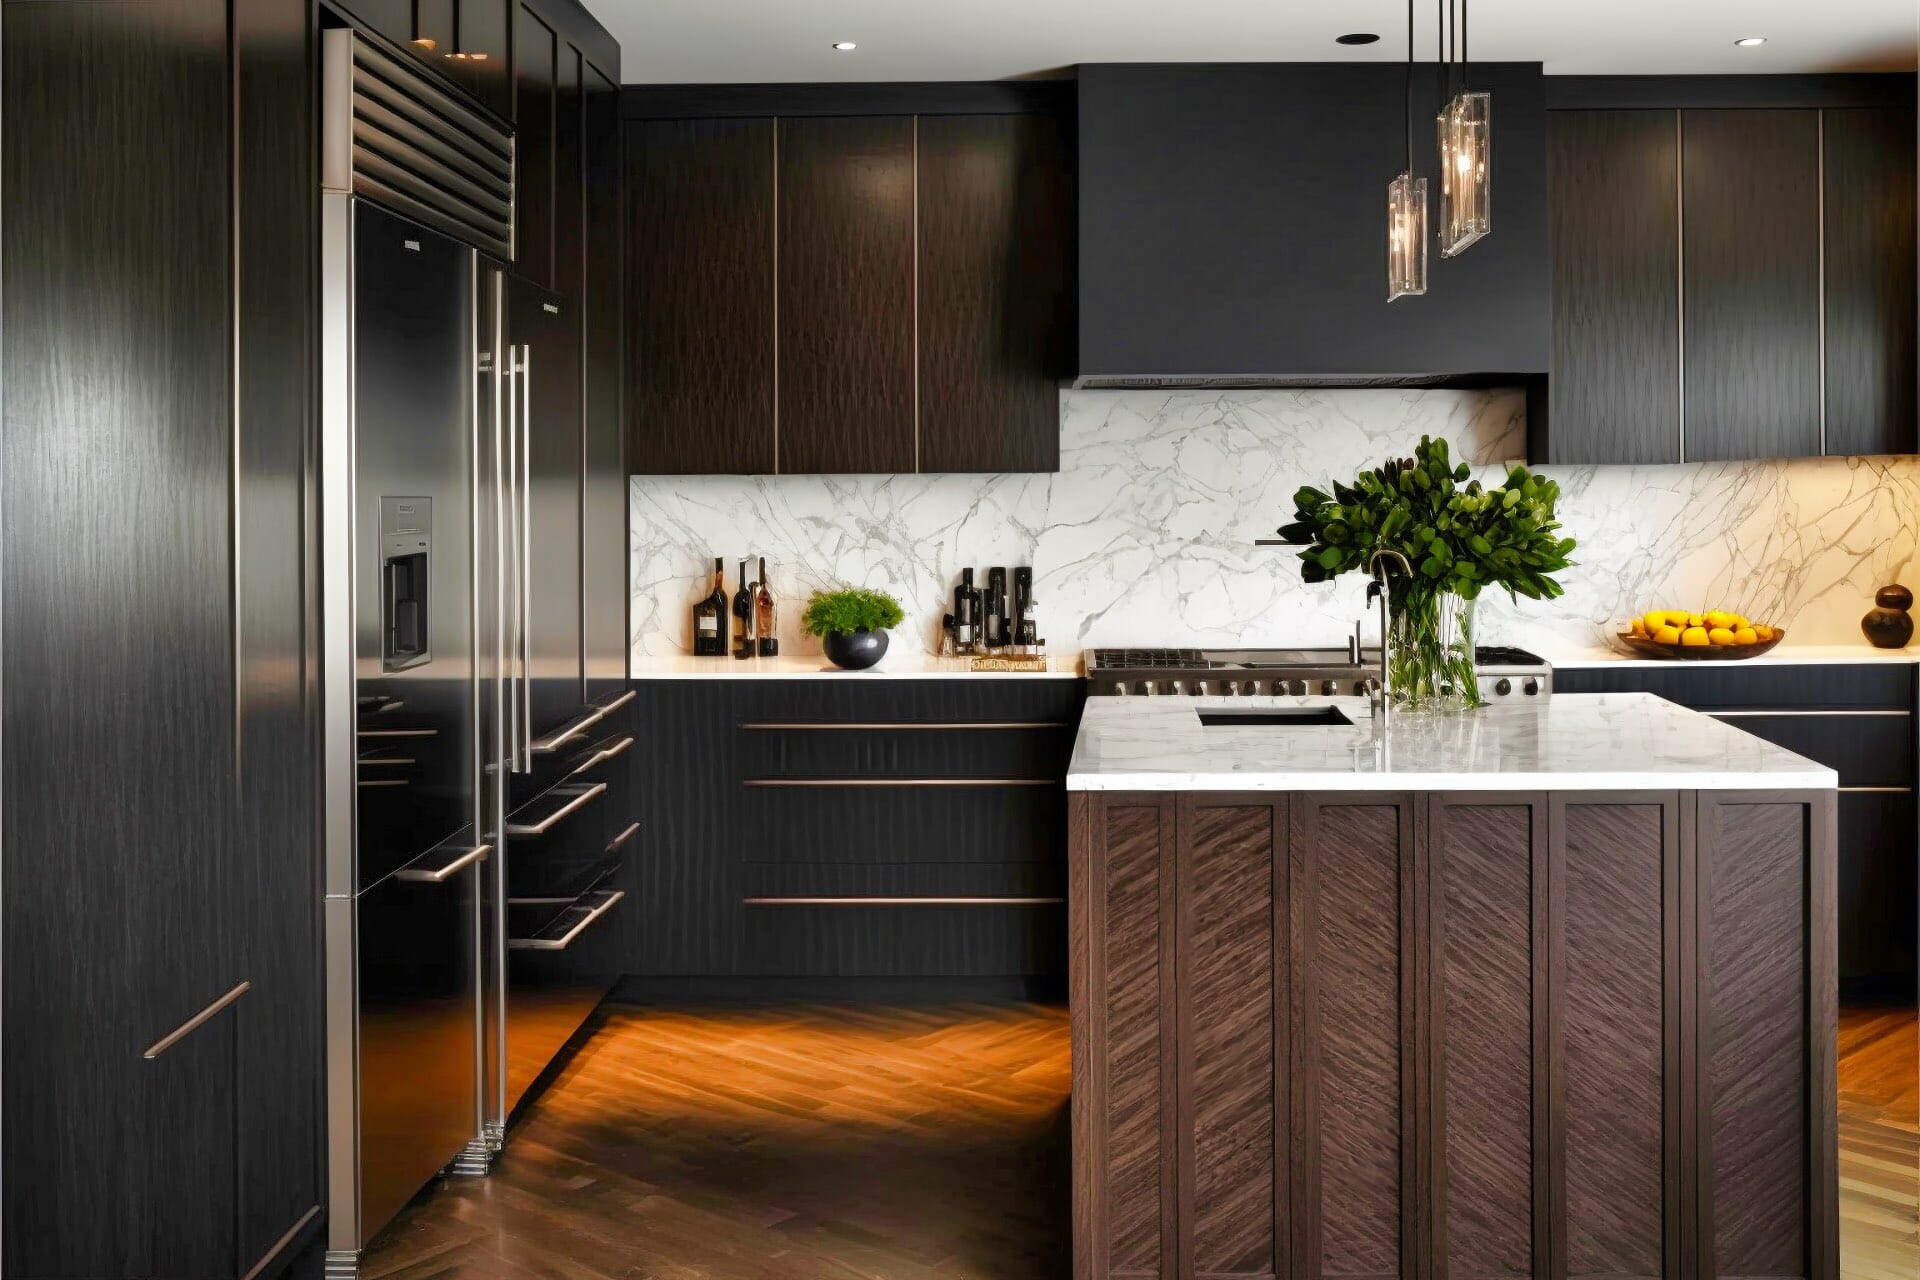 A Bold, Modern Kitchen Featuring Dark Oak Cabinetry, A Black Tile Backsplash, And A Large Marble Countertop.